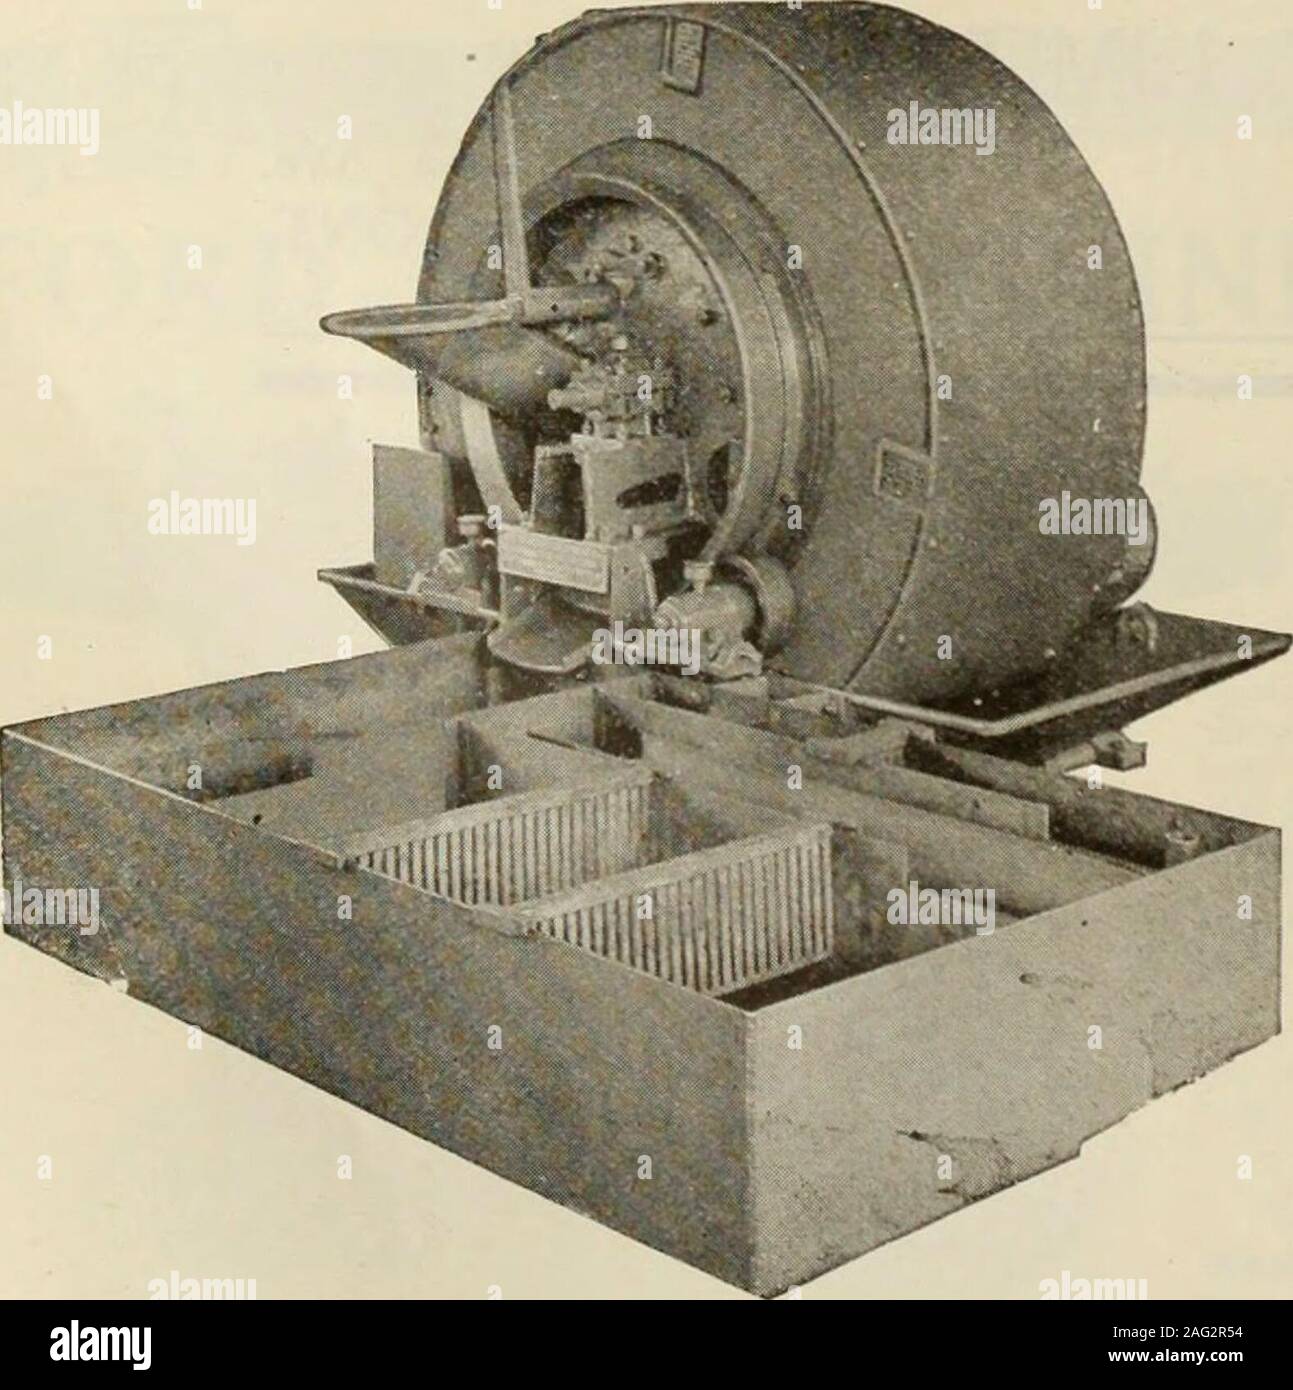 https://c8.alamy.com/comp/2AG2R54/canadian-foundryman-1918-built-for-speed-the-fastest-moulding-machinefor-bench-work-the-simplest-in-construction-requires-the-least-skill-inoperation-send-for-bulletin-mr-tabor10-inch-power-squeezer-the-tabor-mfg-co-18th-and-hamilton-sts-philadelphia-pa-u-s-a-standard-mill-it-reclaims-all-metal-in-cinders-slagskimmings-old-crucibles-etc-built-infour-different-sizes-will-crush-andpulverize-600-to-6000-lbs-per-hour-re-quiring-21-to-vi-hp-circulatingsame-water-over-and-over-the-standard-mill-is-ready-to-operate-assoon-as-you-uncrate-it-pits-under-flooror-special-f-2AG2R54.jpg